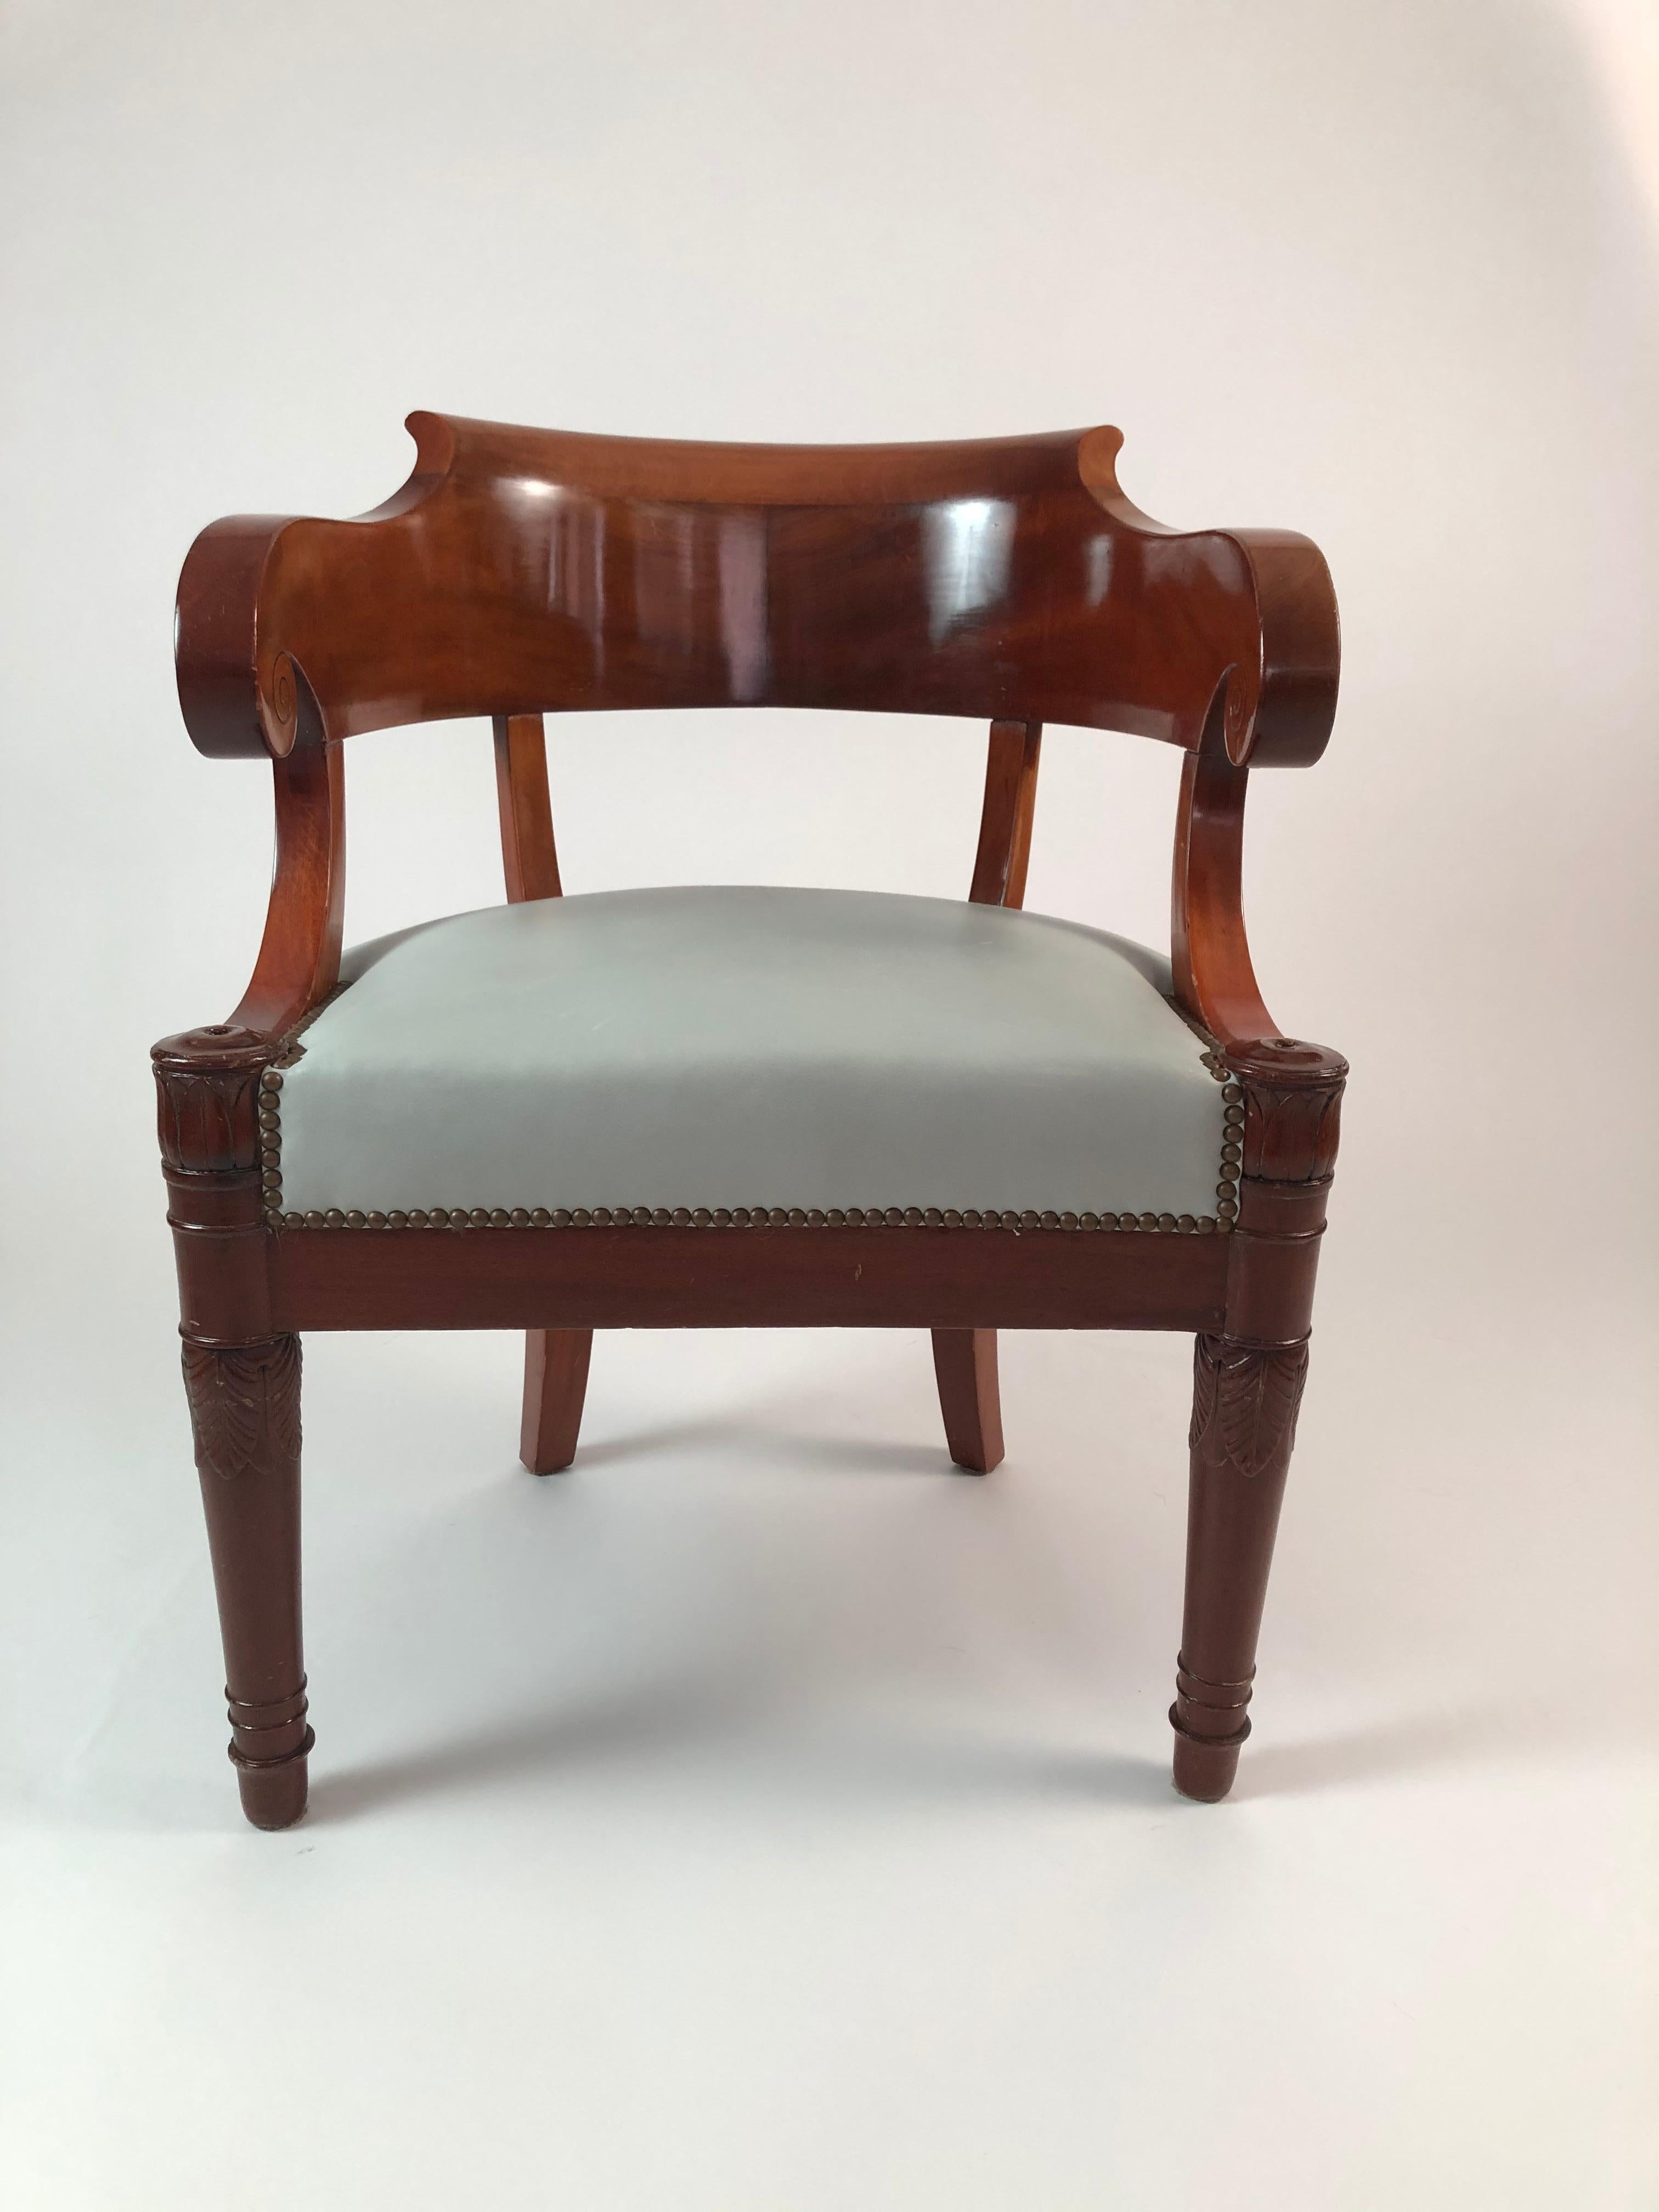 A fine quality early 19th century French Empire period fauteuil in mahogany, the curved backrest terminating in carved scrolled armrests over the seat upholstered in celadon green upholstery, the front tapering legs topped by roundels over lotus and